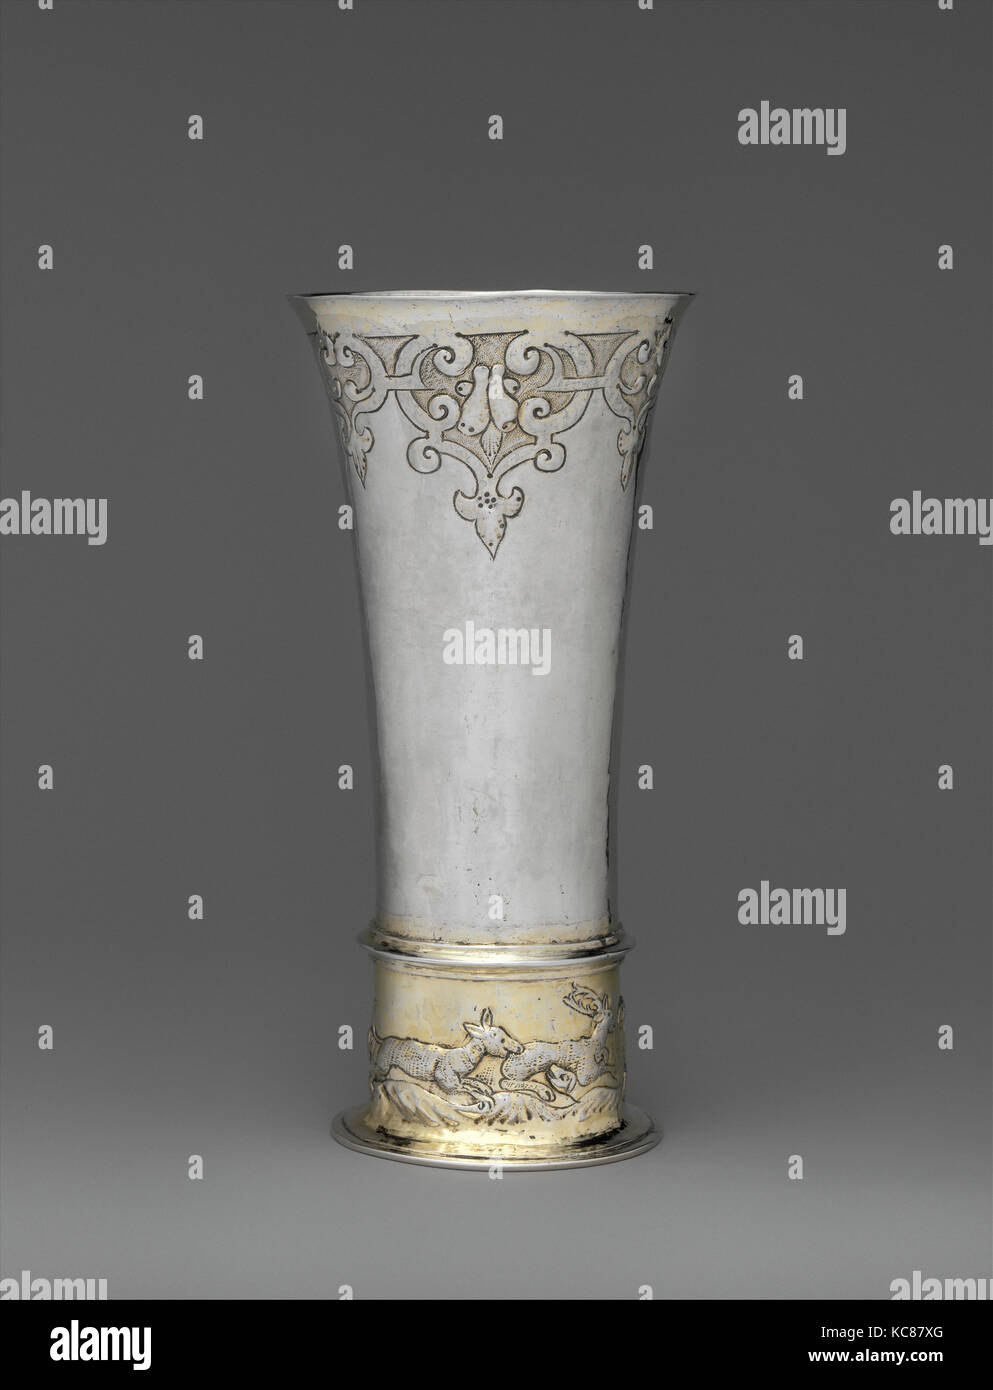 Footed beaker, mid-17th century, Hungarian, Brassó, Silver, partly gilded, Overall: 7 3/16 x 3 9/16 in. (18.3 x 9 cm), Metalwork Stock Photo